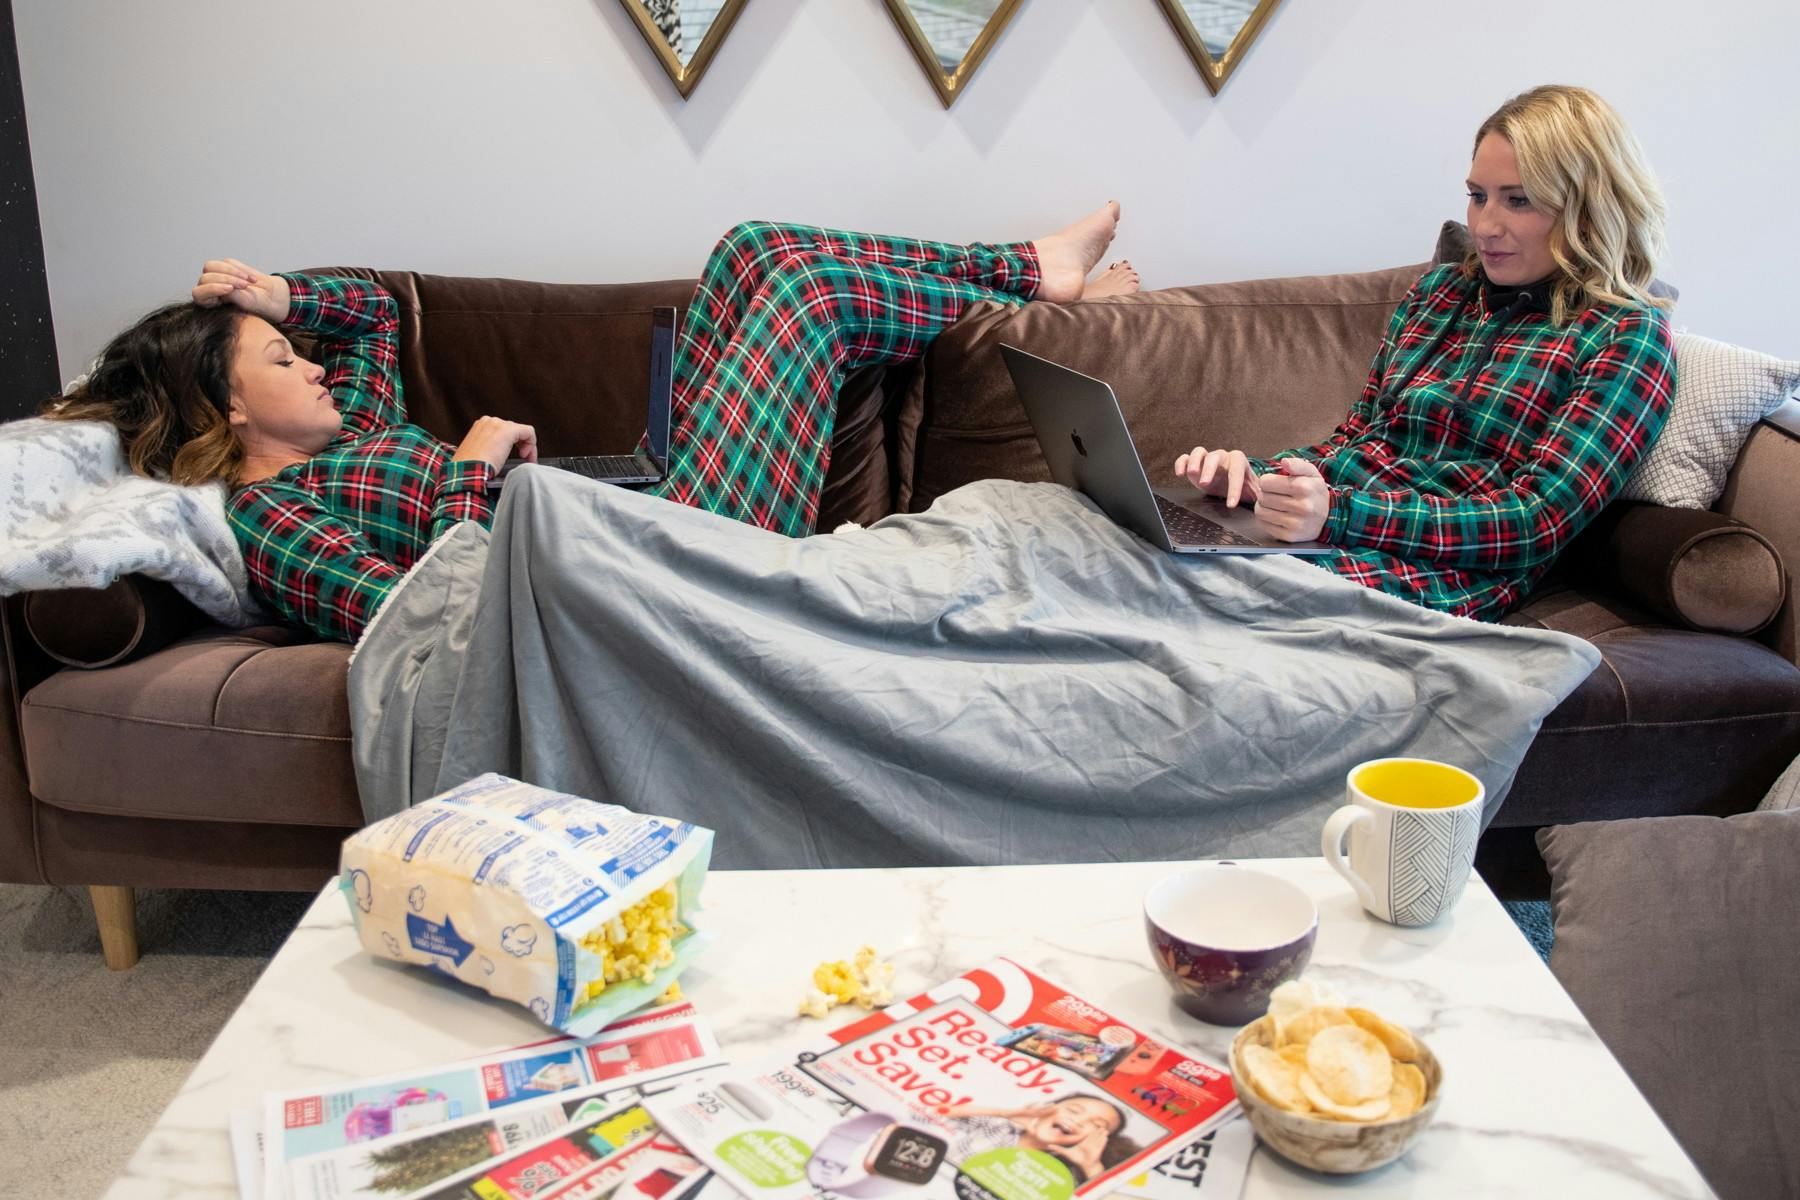 Two women in matching pajamas lounging on a couch, both of them using their laptops to shop Black Friday online deals. In the foreground there is a coffee table with paper shopping ads scattered on it next to some popcorn and coffee mugs.